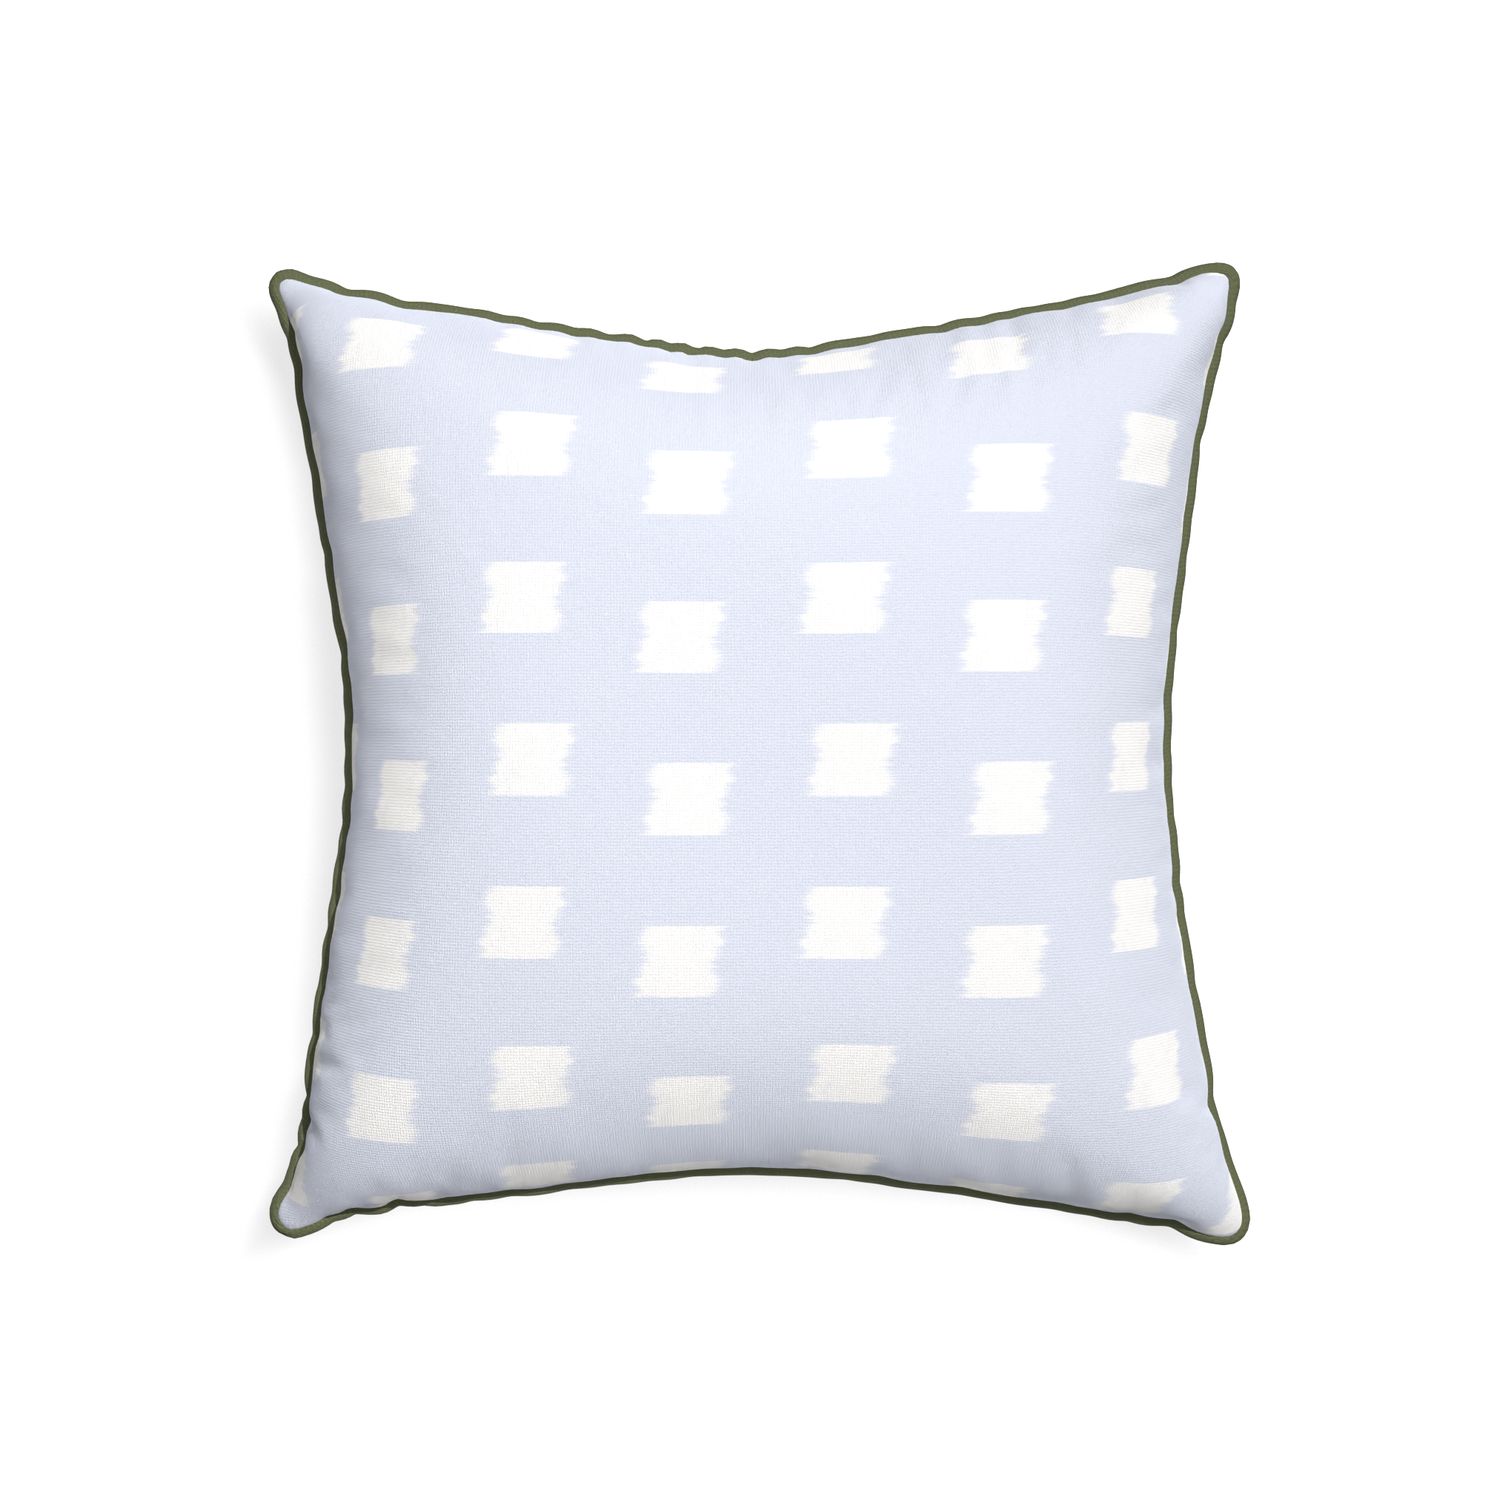 22-square denton custom sky blue patternpillow with f piping on white background